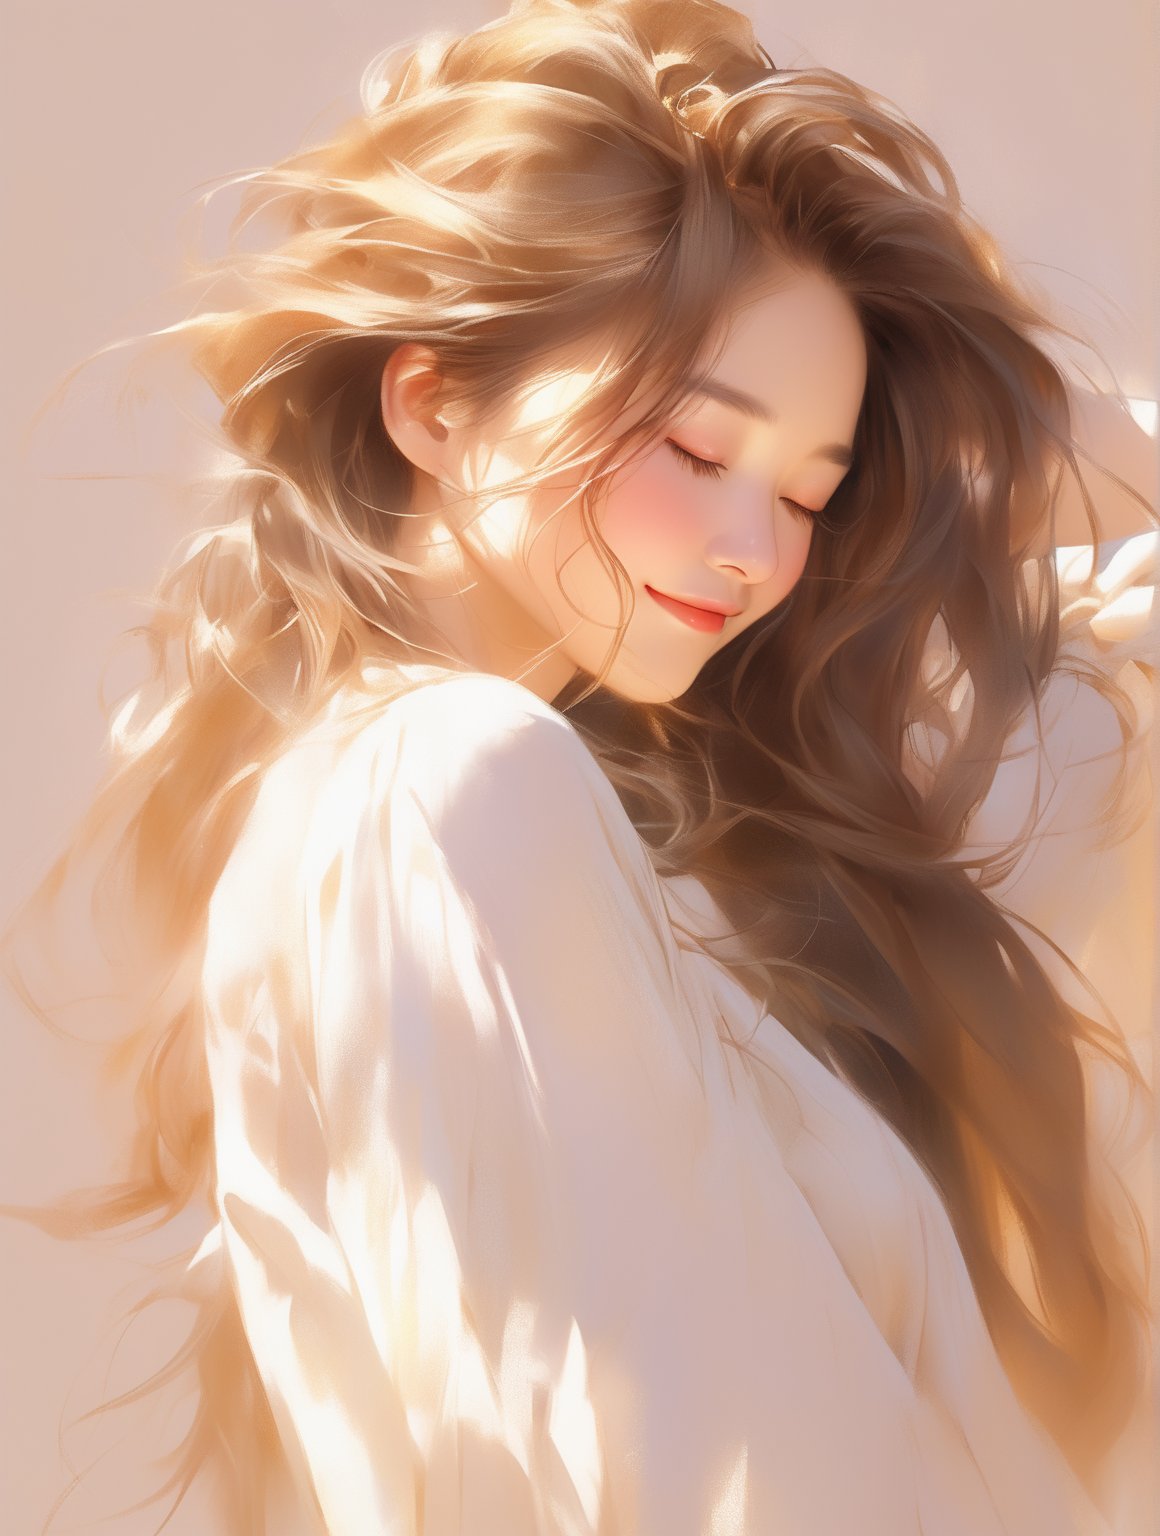 A young Asian woman with long, flowing hair stands against a soft, warm background, her eyes closed and a gentle, contented smile on her face. The sunlight bathes her in a golden glow, highlighting the delicate features of her face and the softness of her hair. She wears a light, airy blouse that complements the serene and blissful atmosphere. The overall scene exudes a sense of peace, joy, and tranquility, capturing a perfect moment of quiet happiness,  8k, masterpiece, ultra-realistic, best quality, high resolution, high definition.